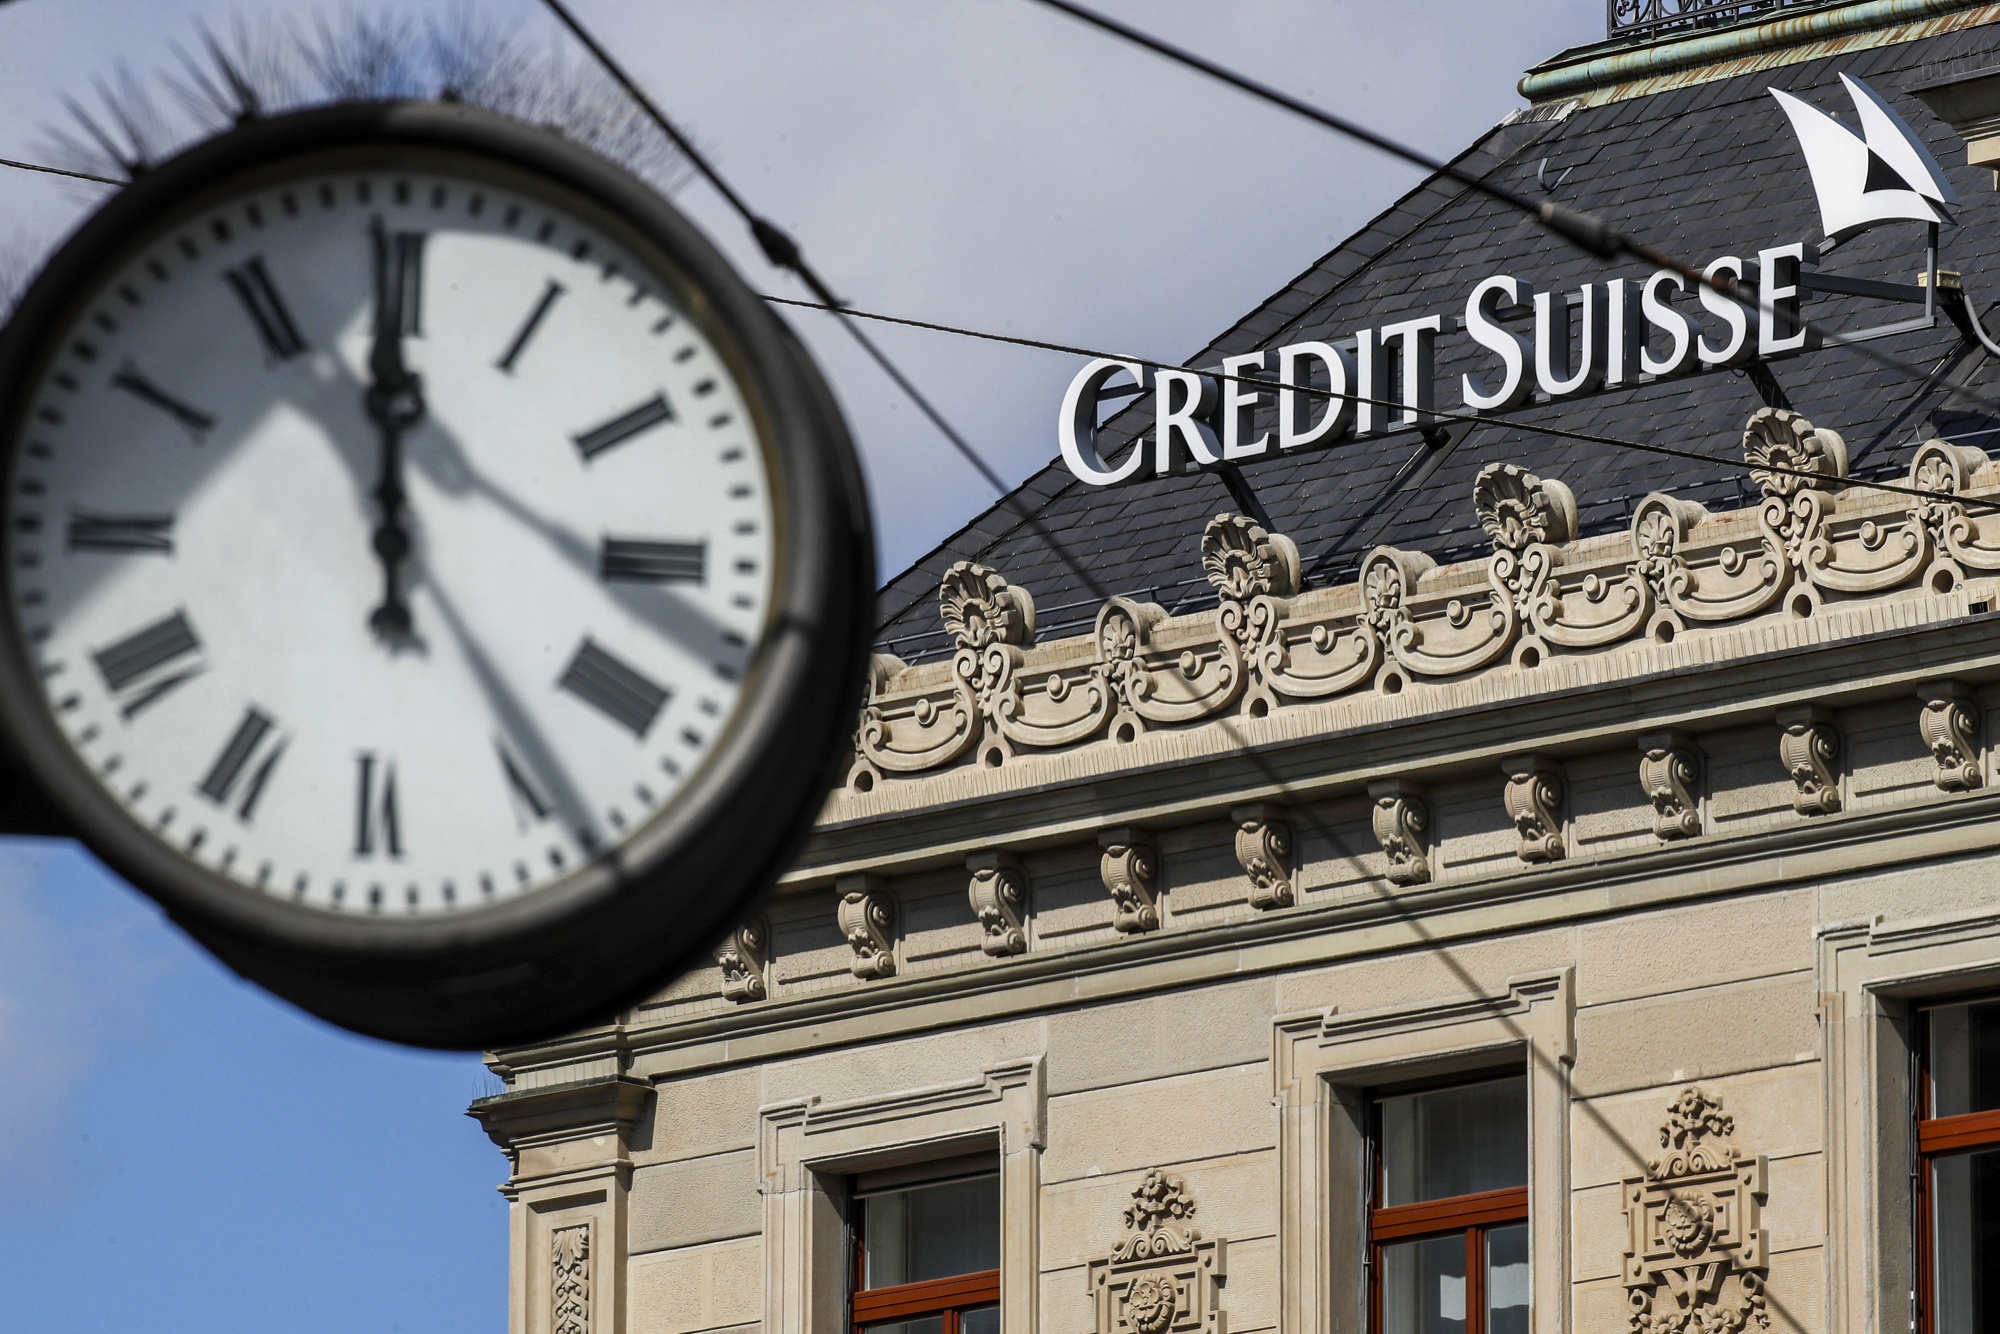 A Credit Suisse logo on the roof of the Credit Suisse headquarters in Zurich.